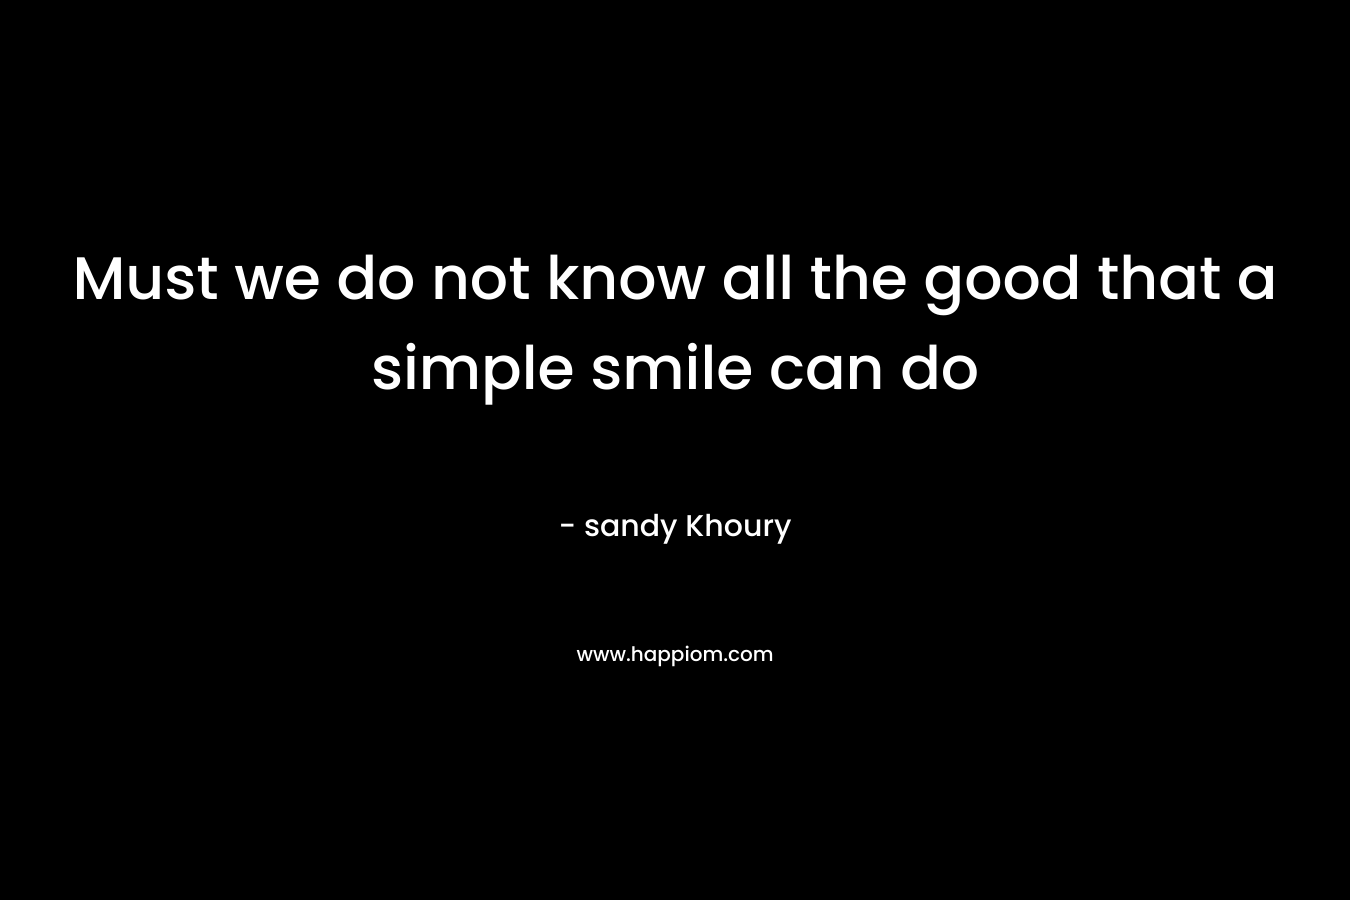 Must we do not know all the good that a simple smile can do